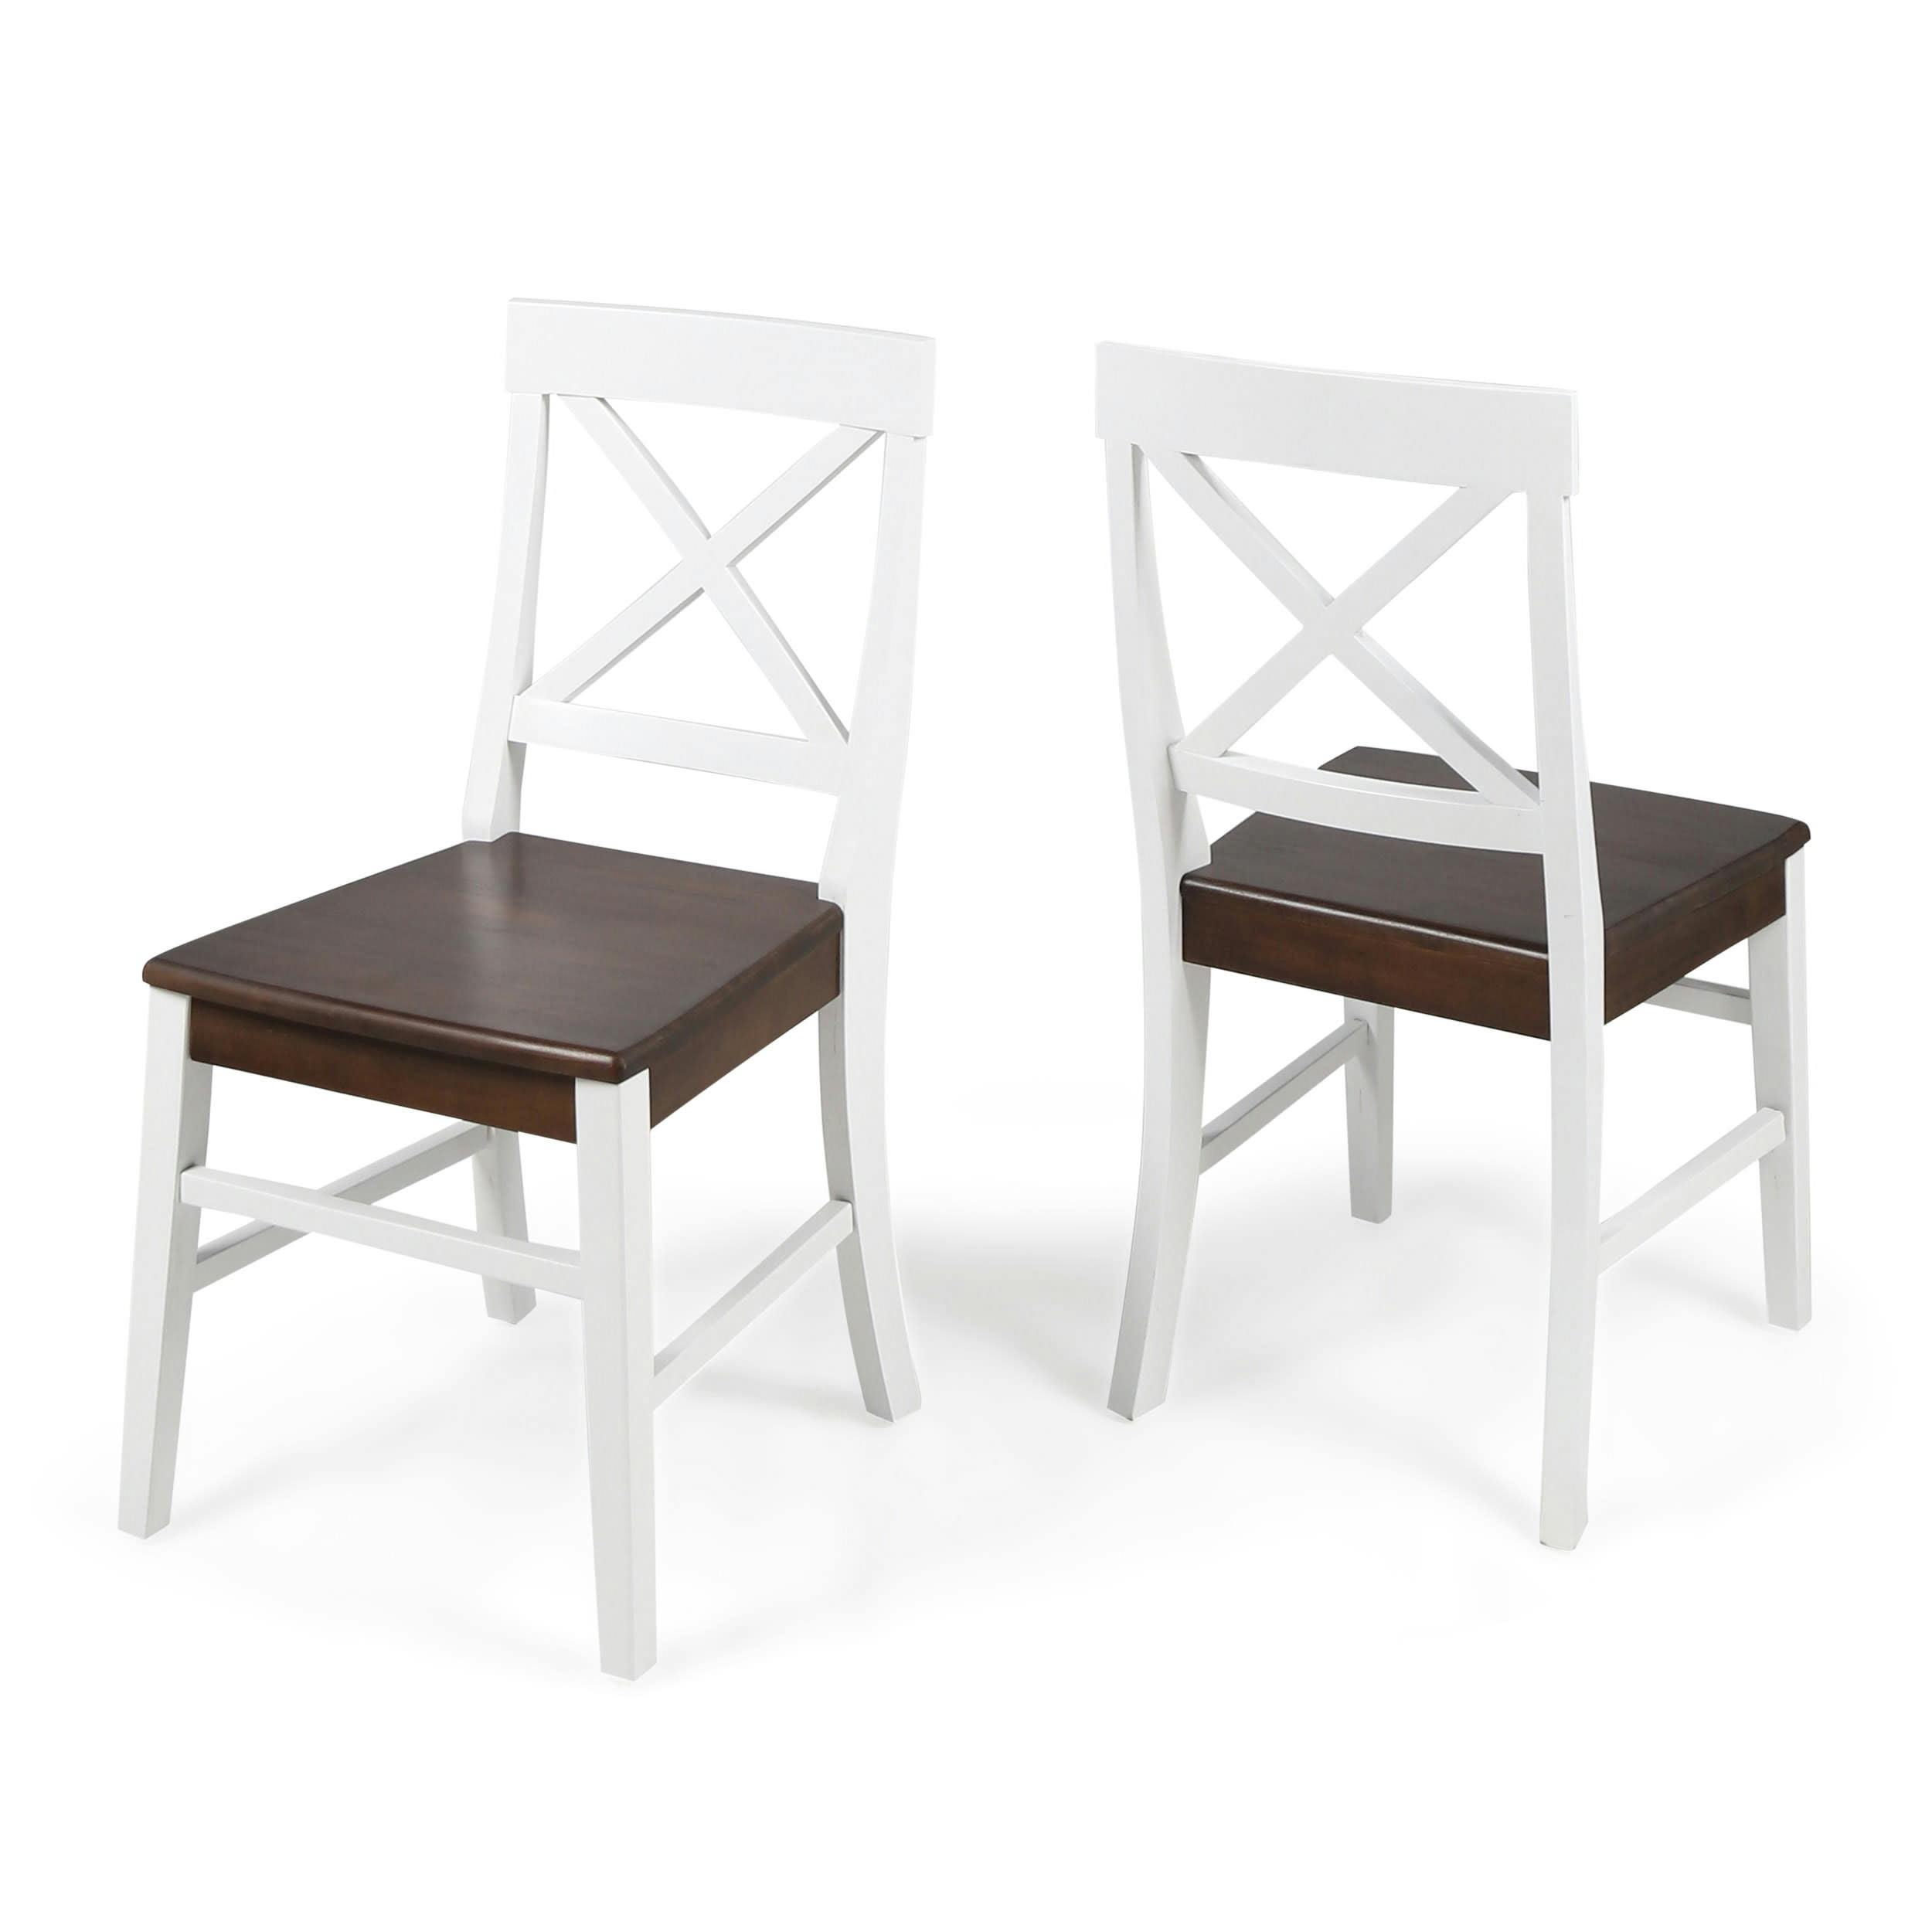 Rustic Acacia Wood Dining Chairs in White and Walnut, Set of 2